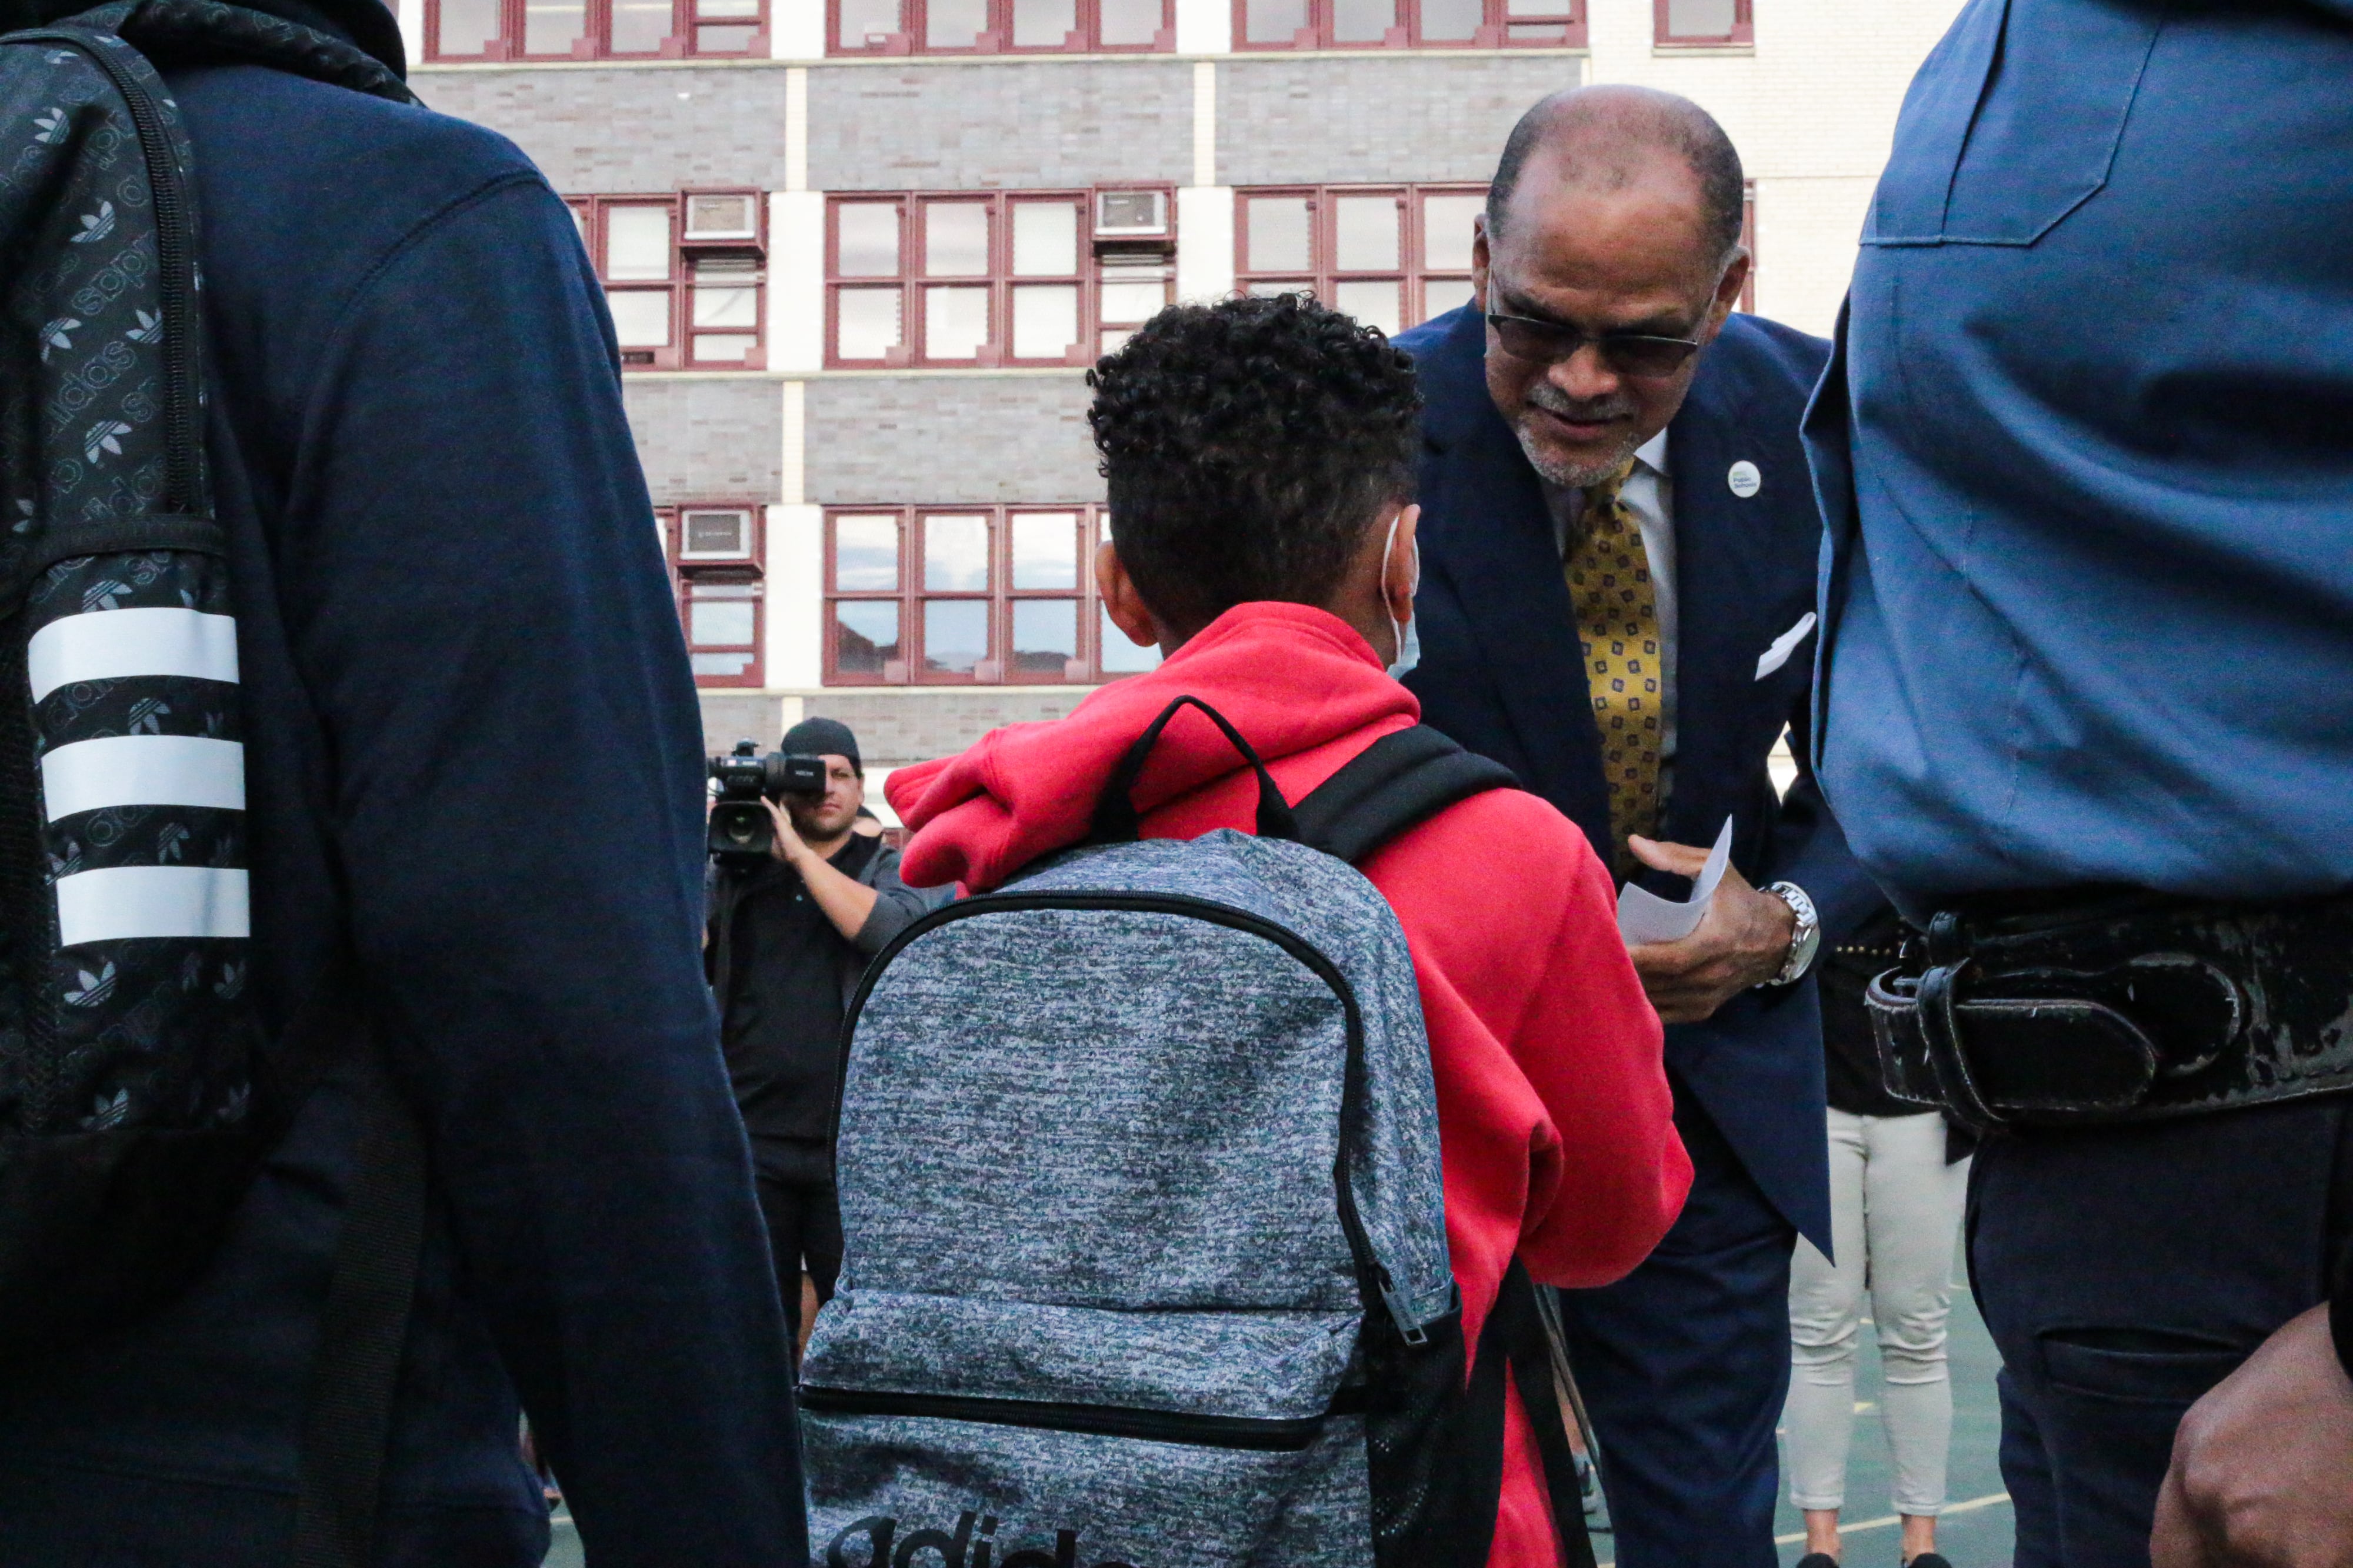 A man in a suit bends down to talk to a student wearing a backpack. The student is facing away.